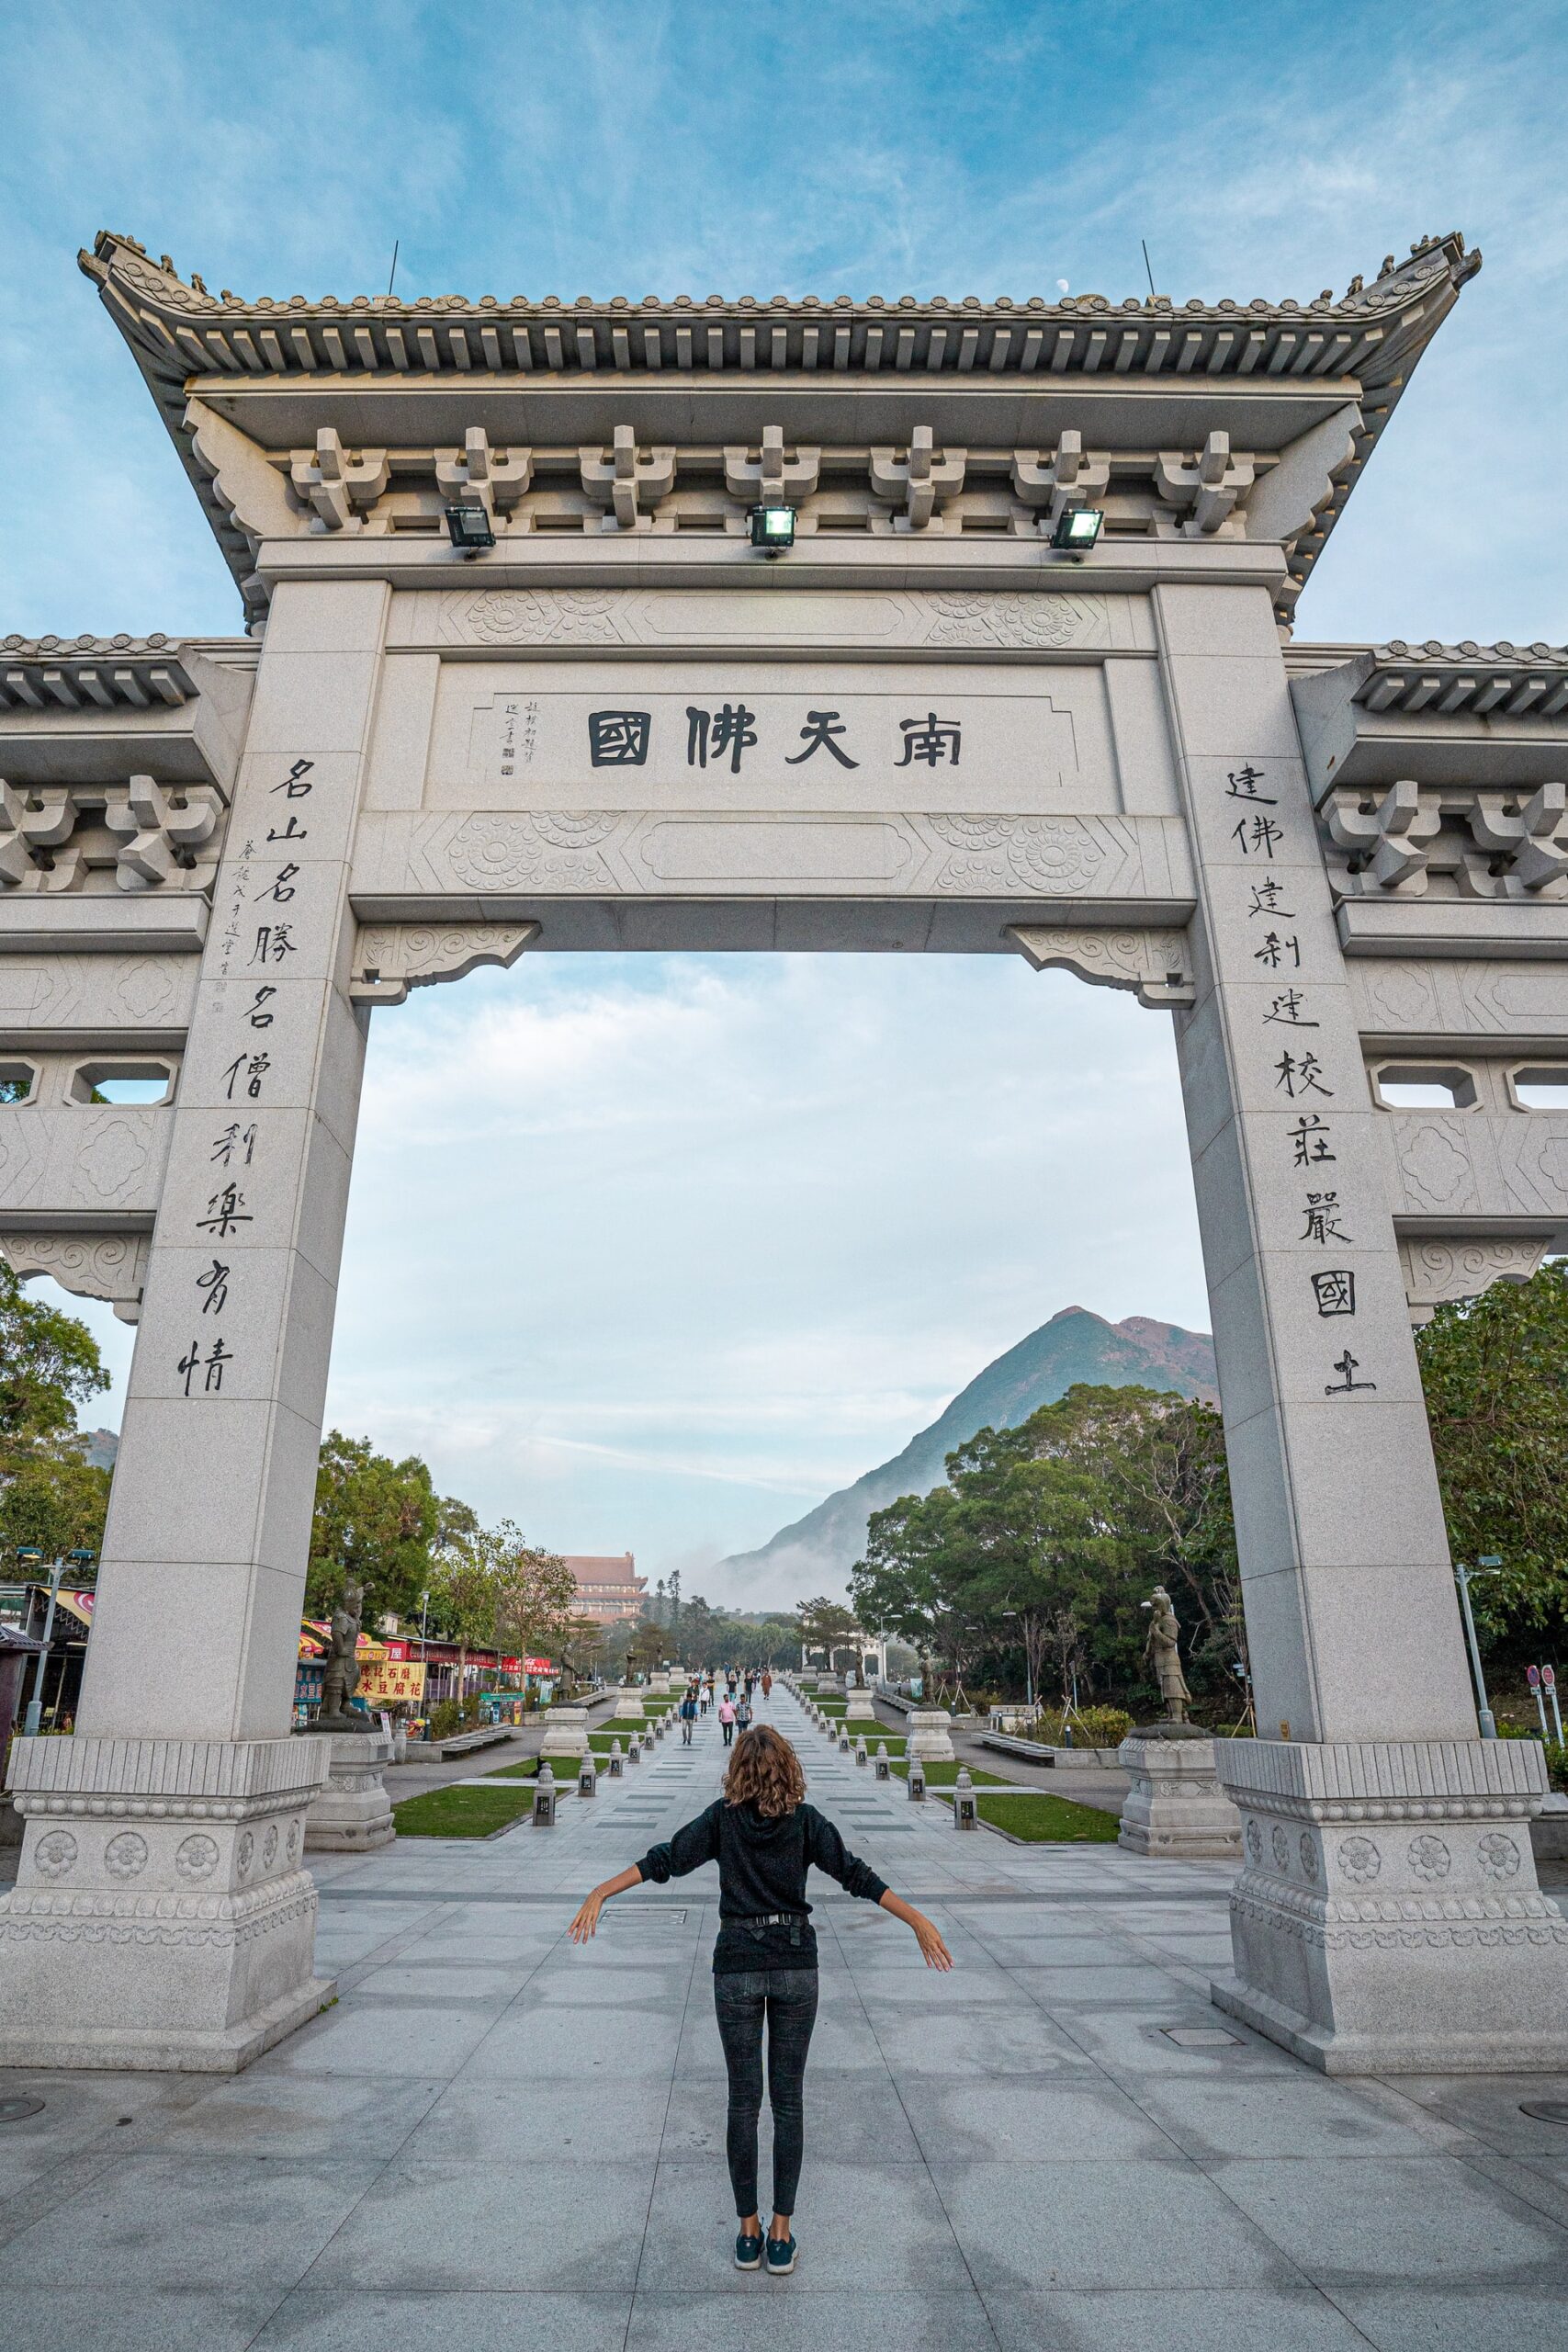 passing under the gate with mountain views in Lantau Island Hong Kong